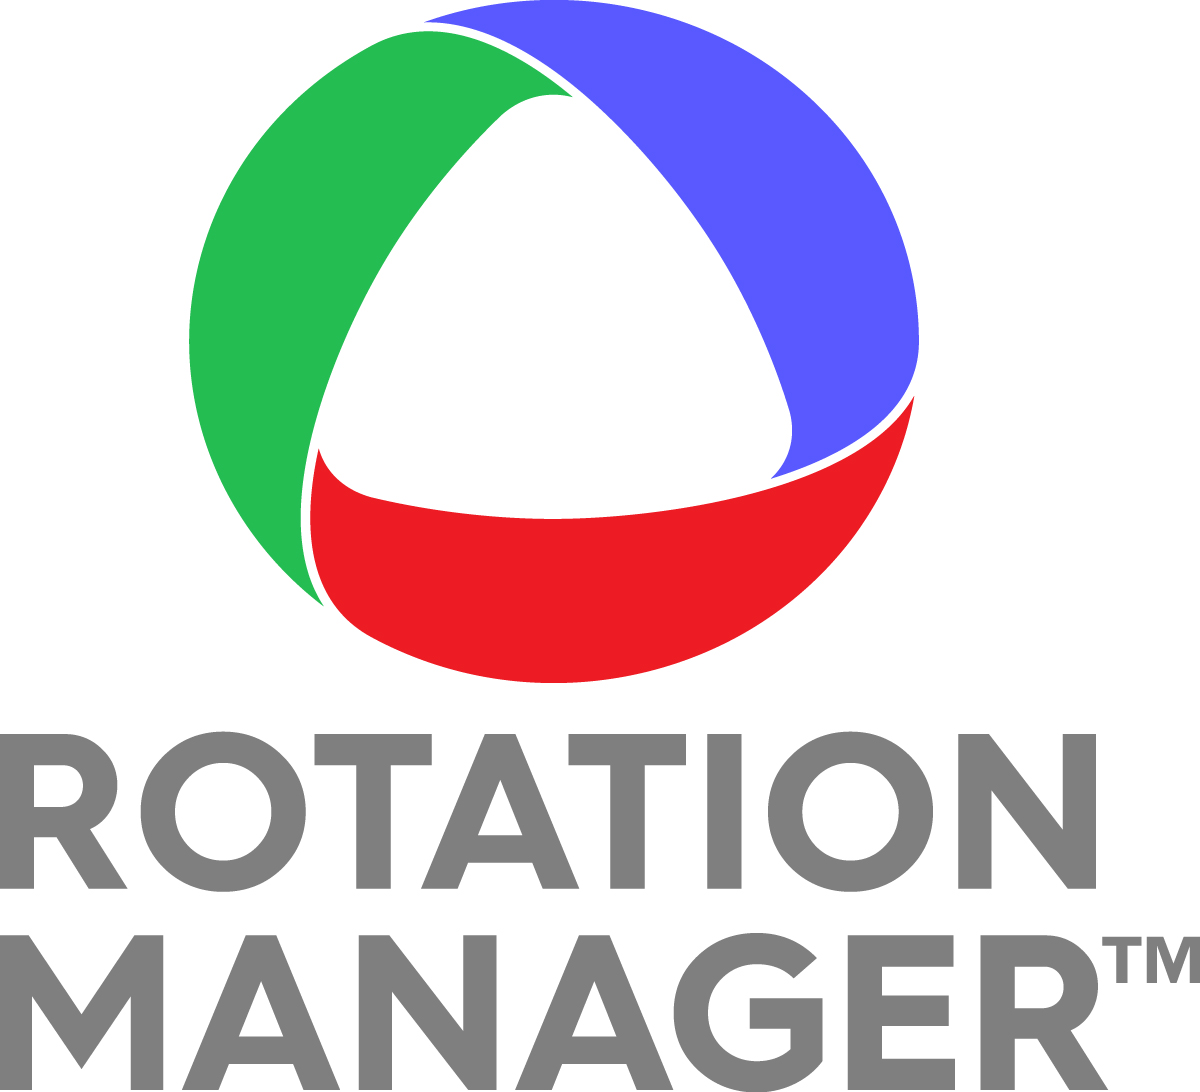 Students Rotation Software, Inc. (United States) on databroker